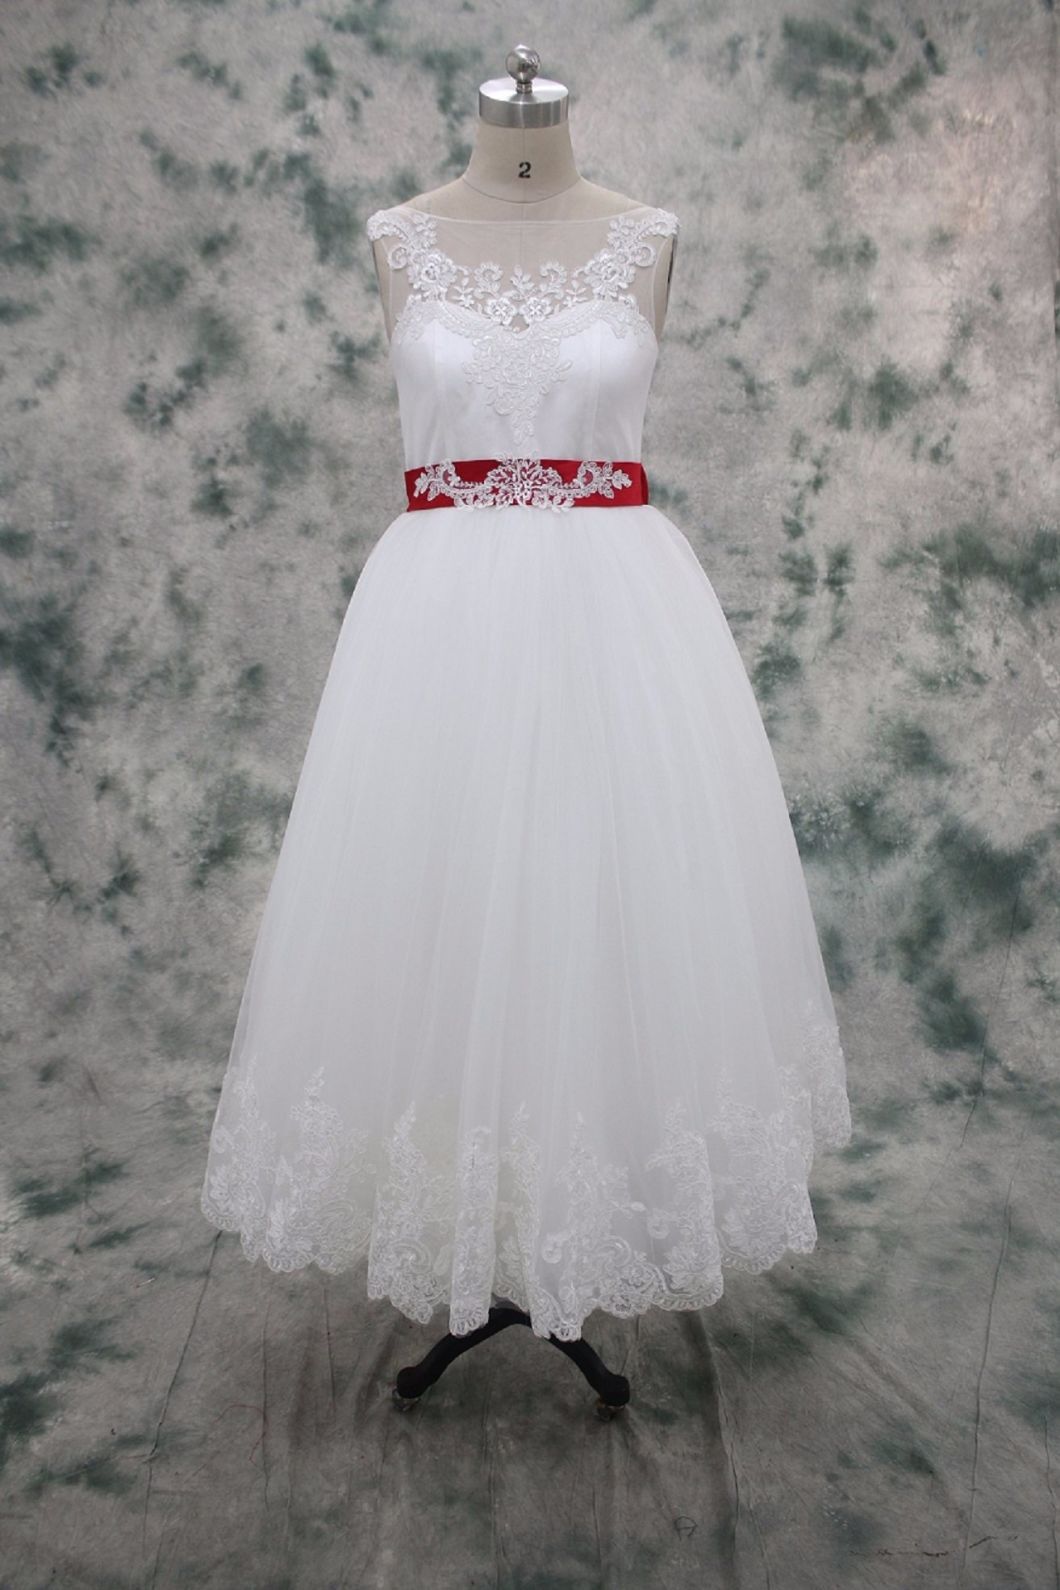 Real Customize Lace Appliqued Children Flower Girl Dress